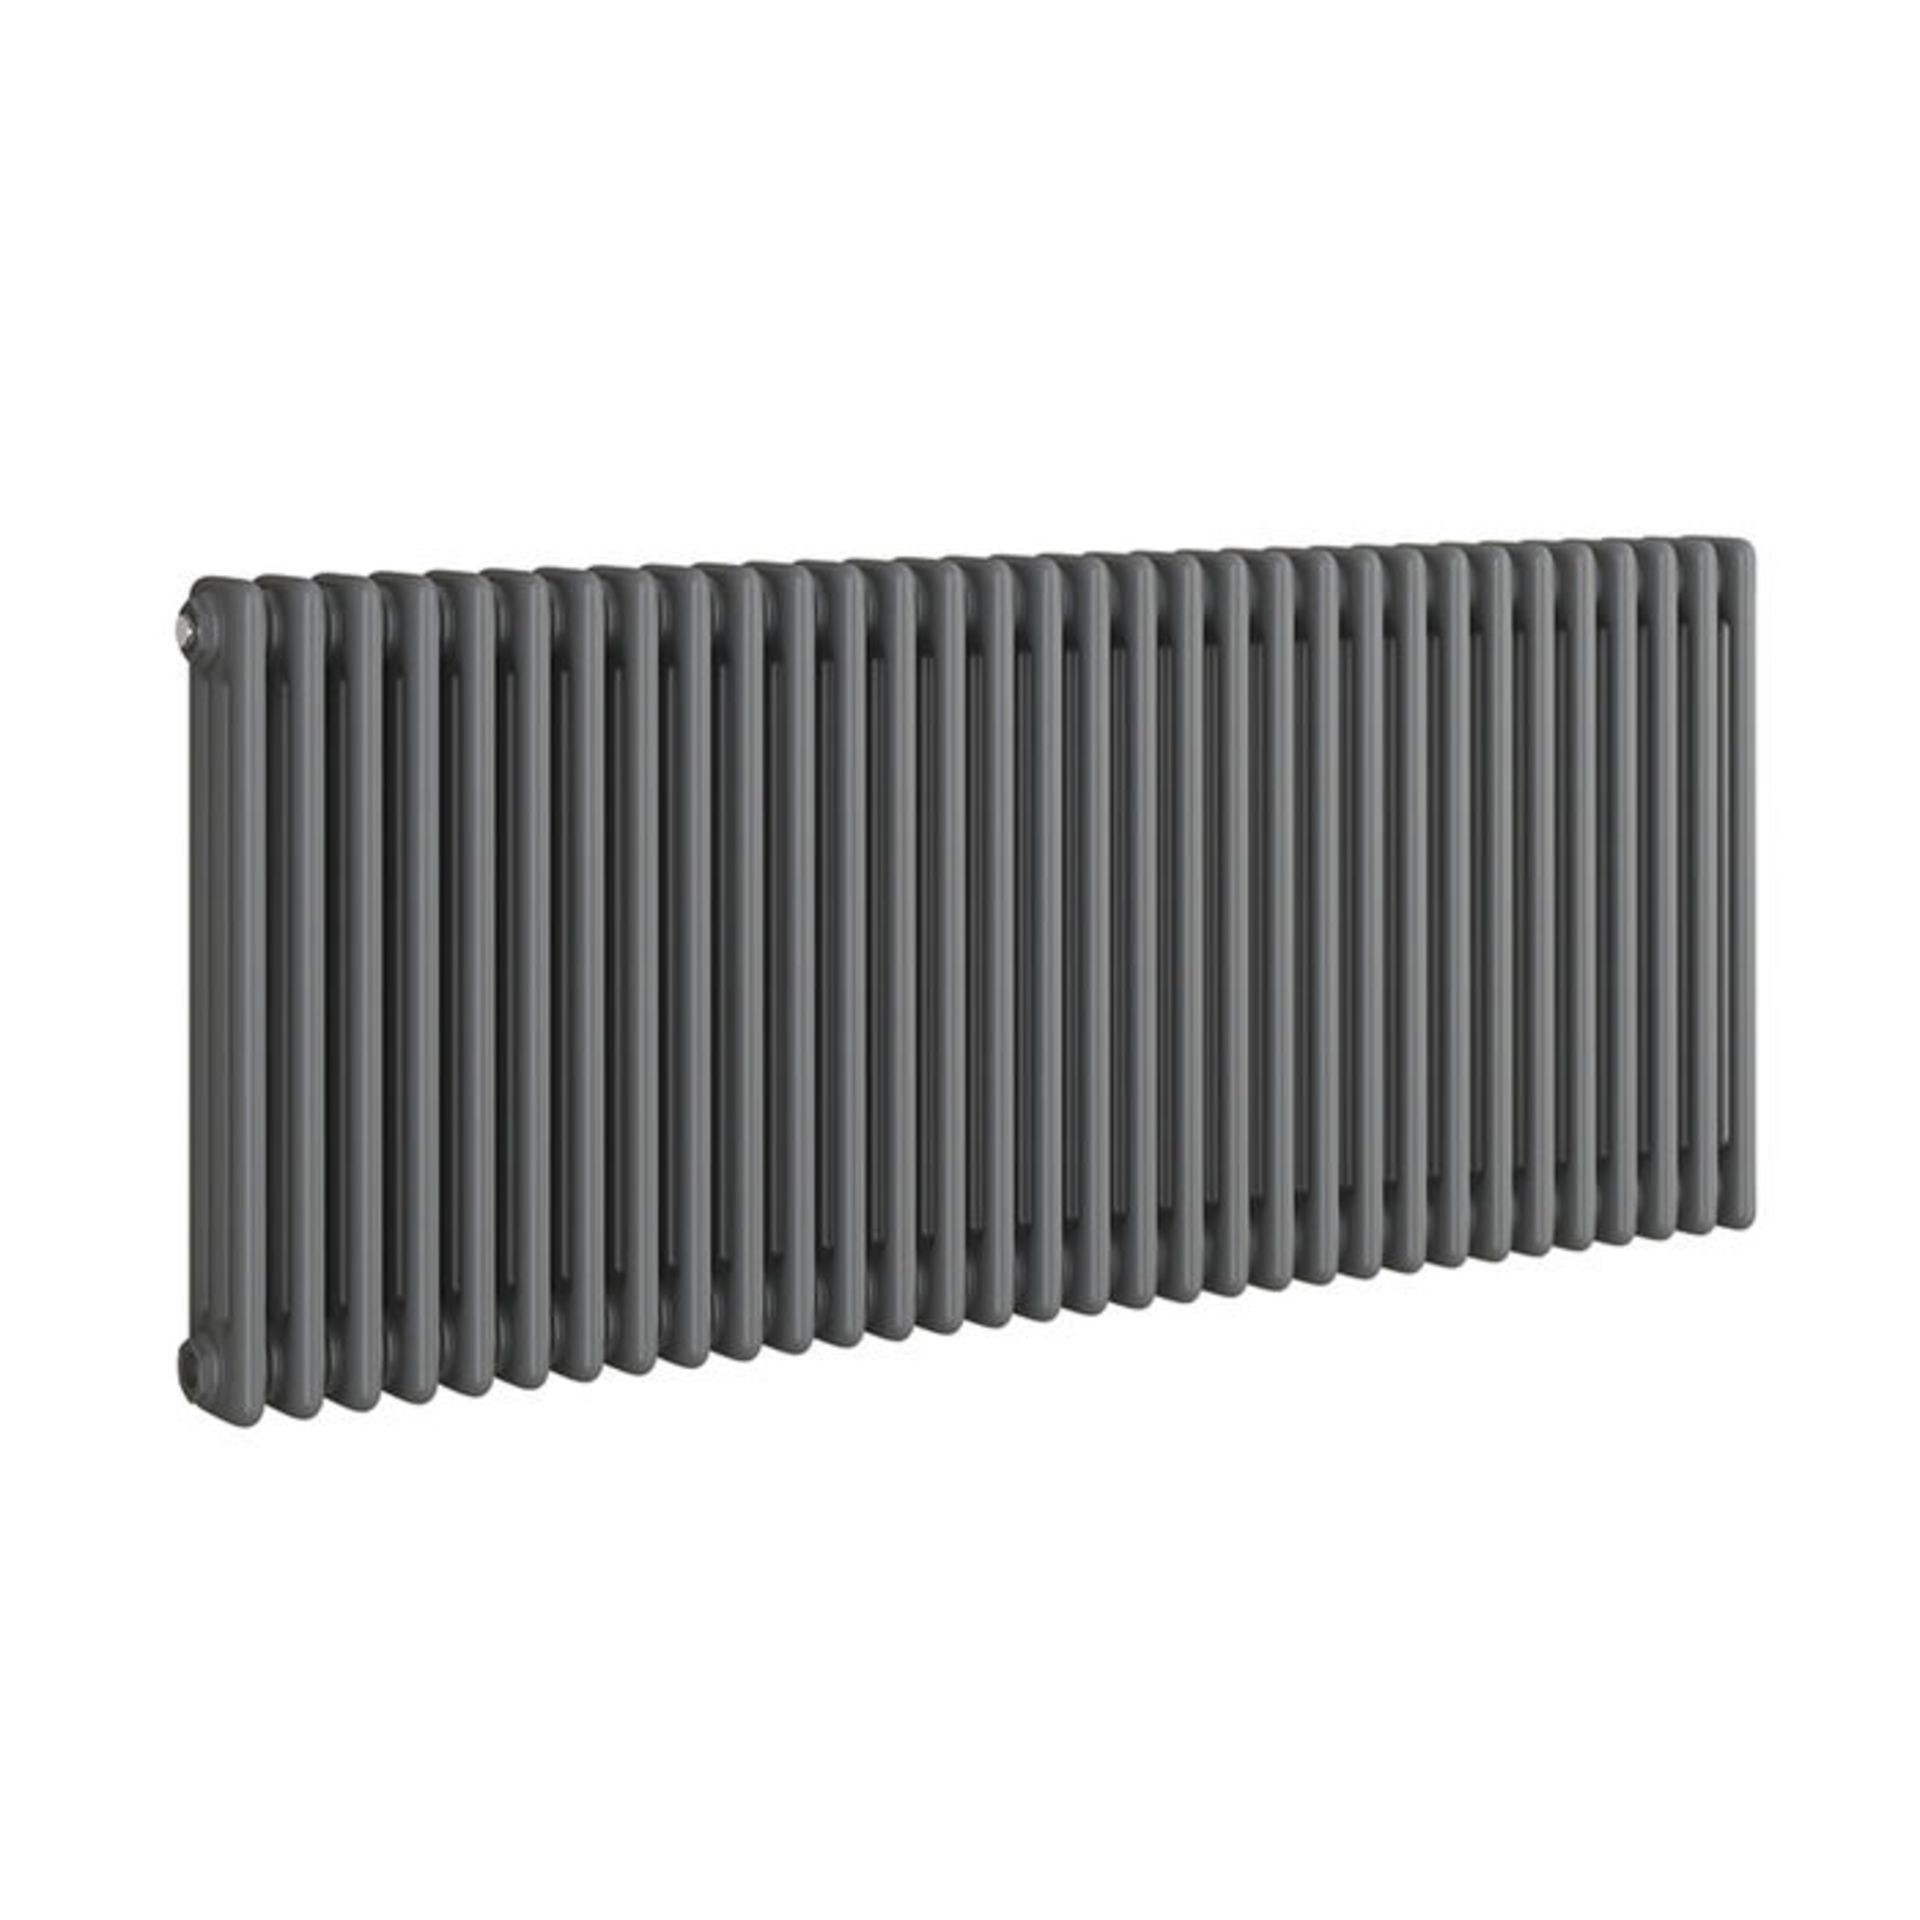 NEW & BOXED 600x1188mm Anthracite Double Panel Horizontal Colosseum Traditional Radiator. RCA56... - Image 3 of 3